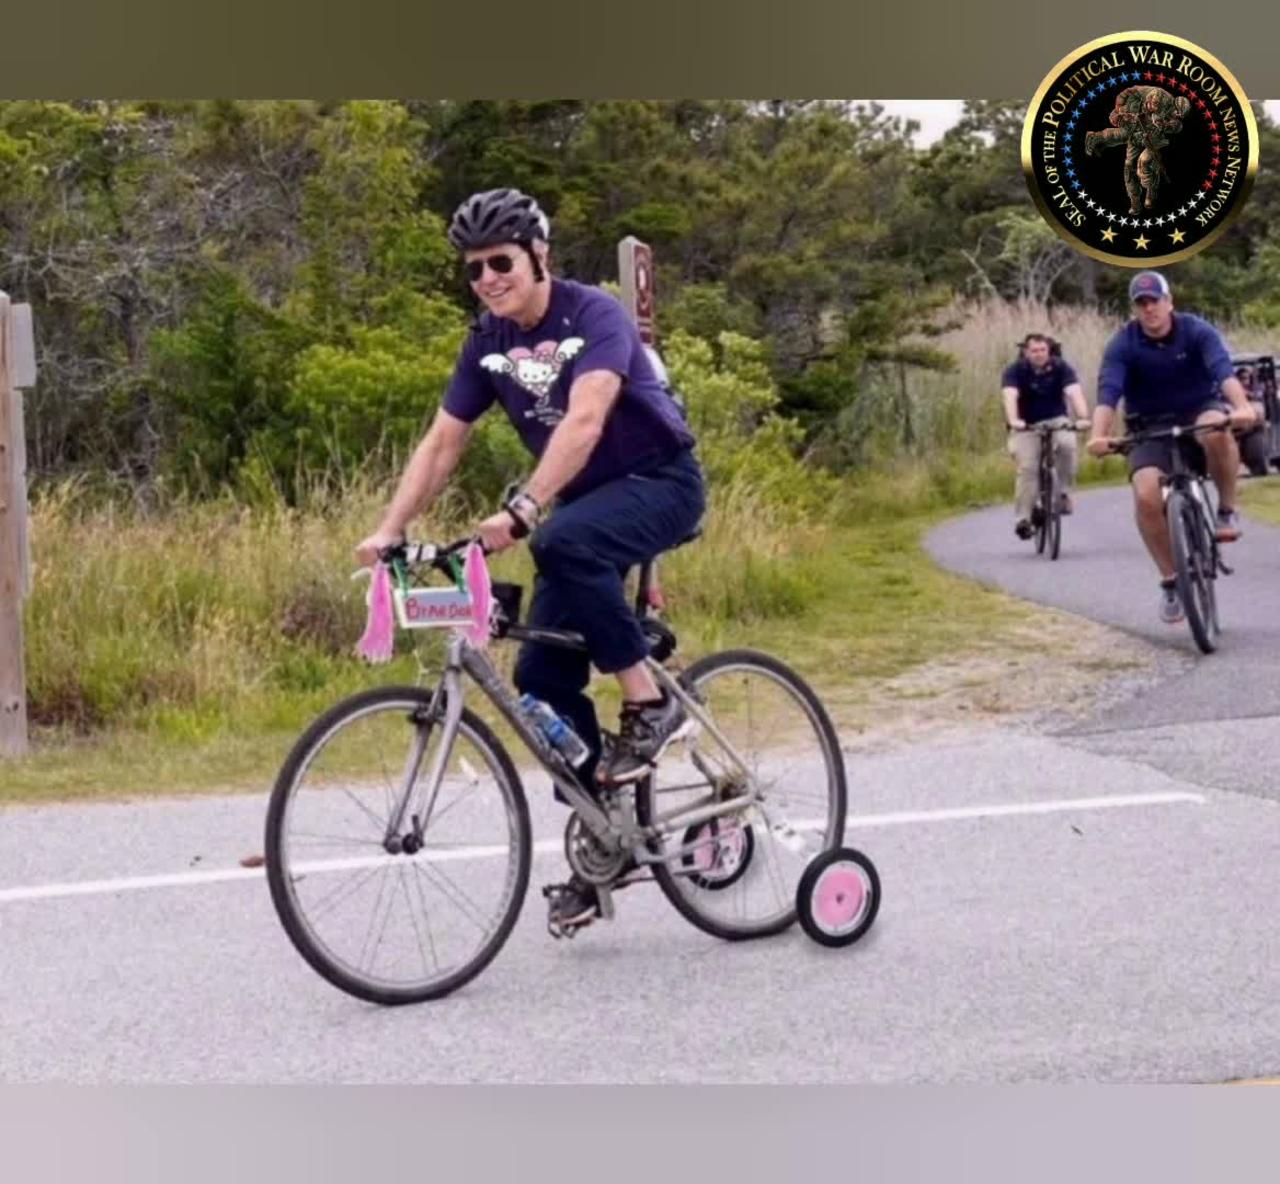 🤣"BIDEN'S AFTERMATH FALLS MAN ASK WHERE IS YOUR F**KING TRAINING WHEELS"🤣